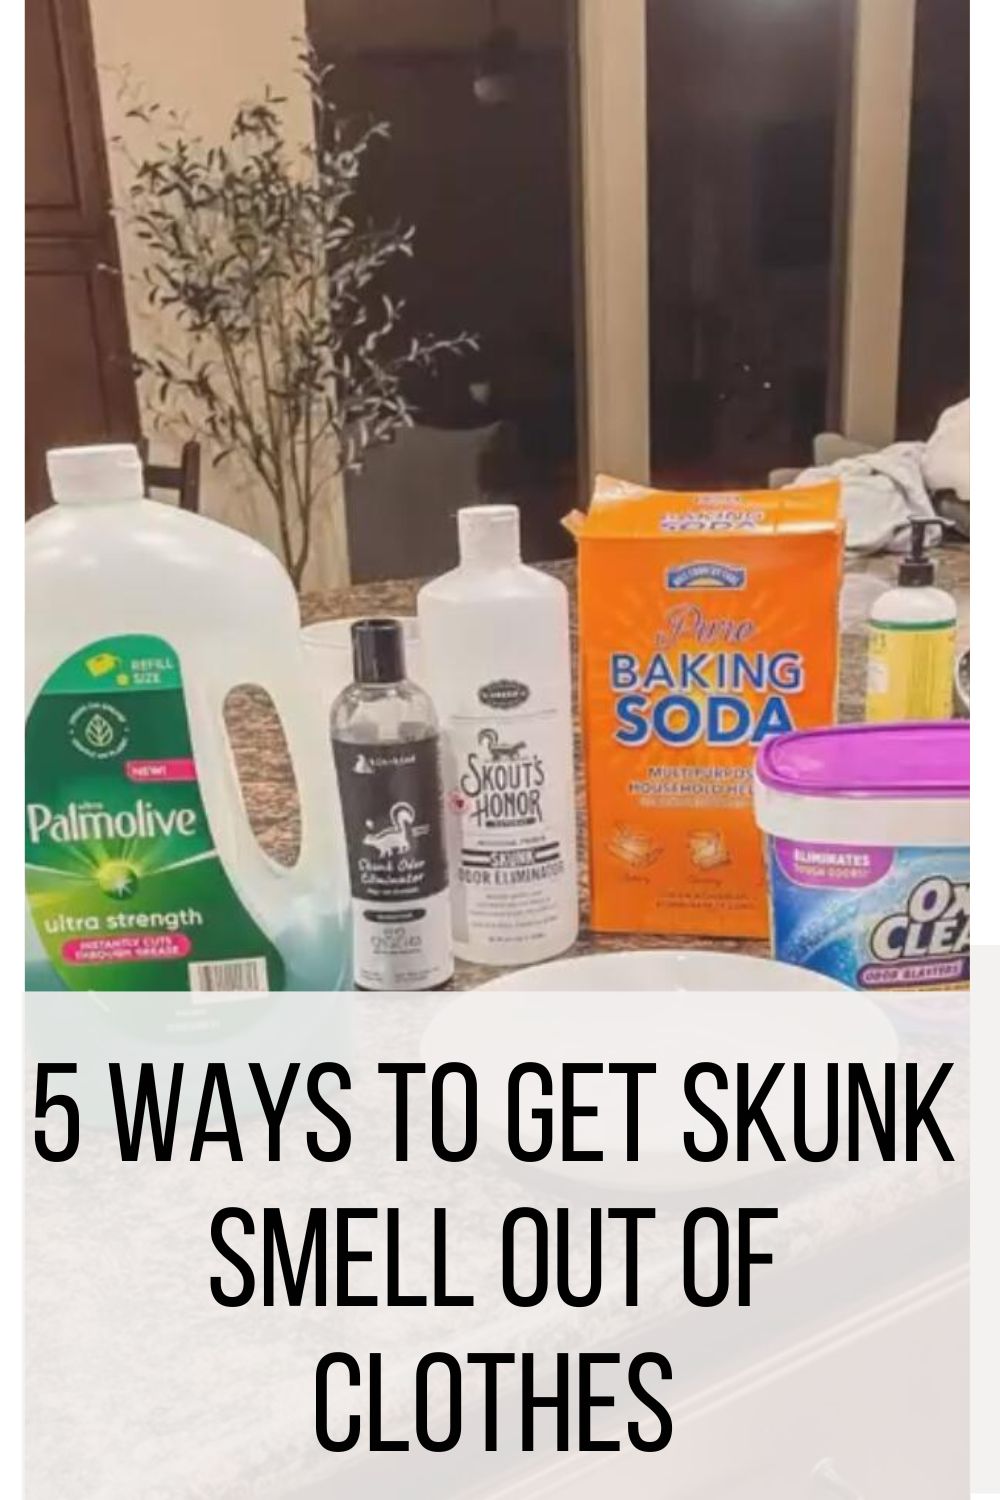 5 Ways to Get Skunk Smell Out of Clothes